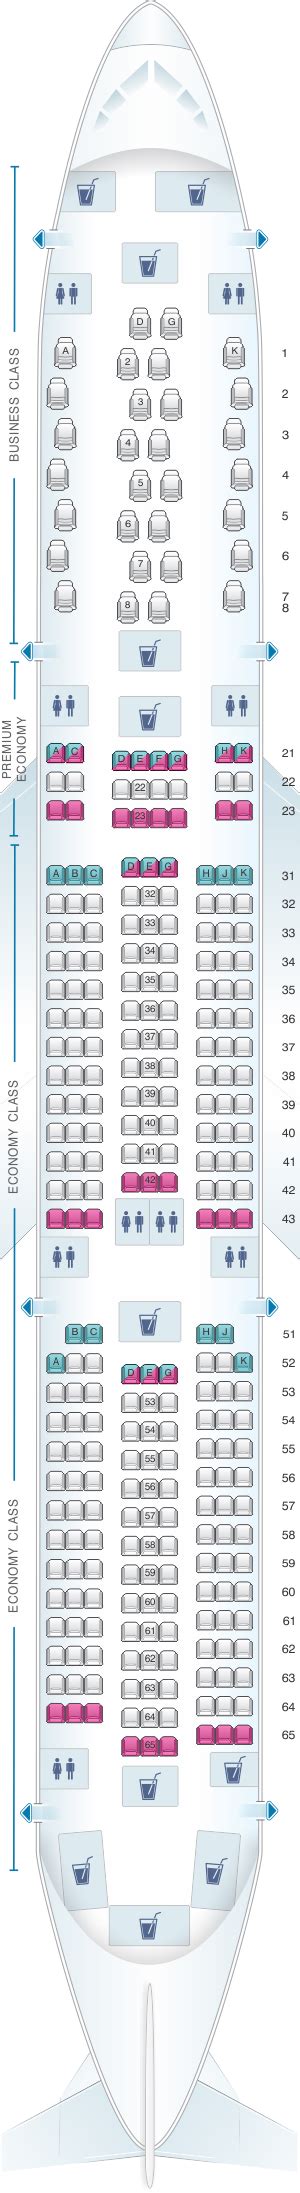 Share Imagen Boeing Er Seat Map Philippine Airlines In